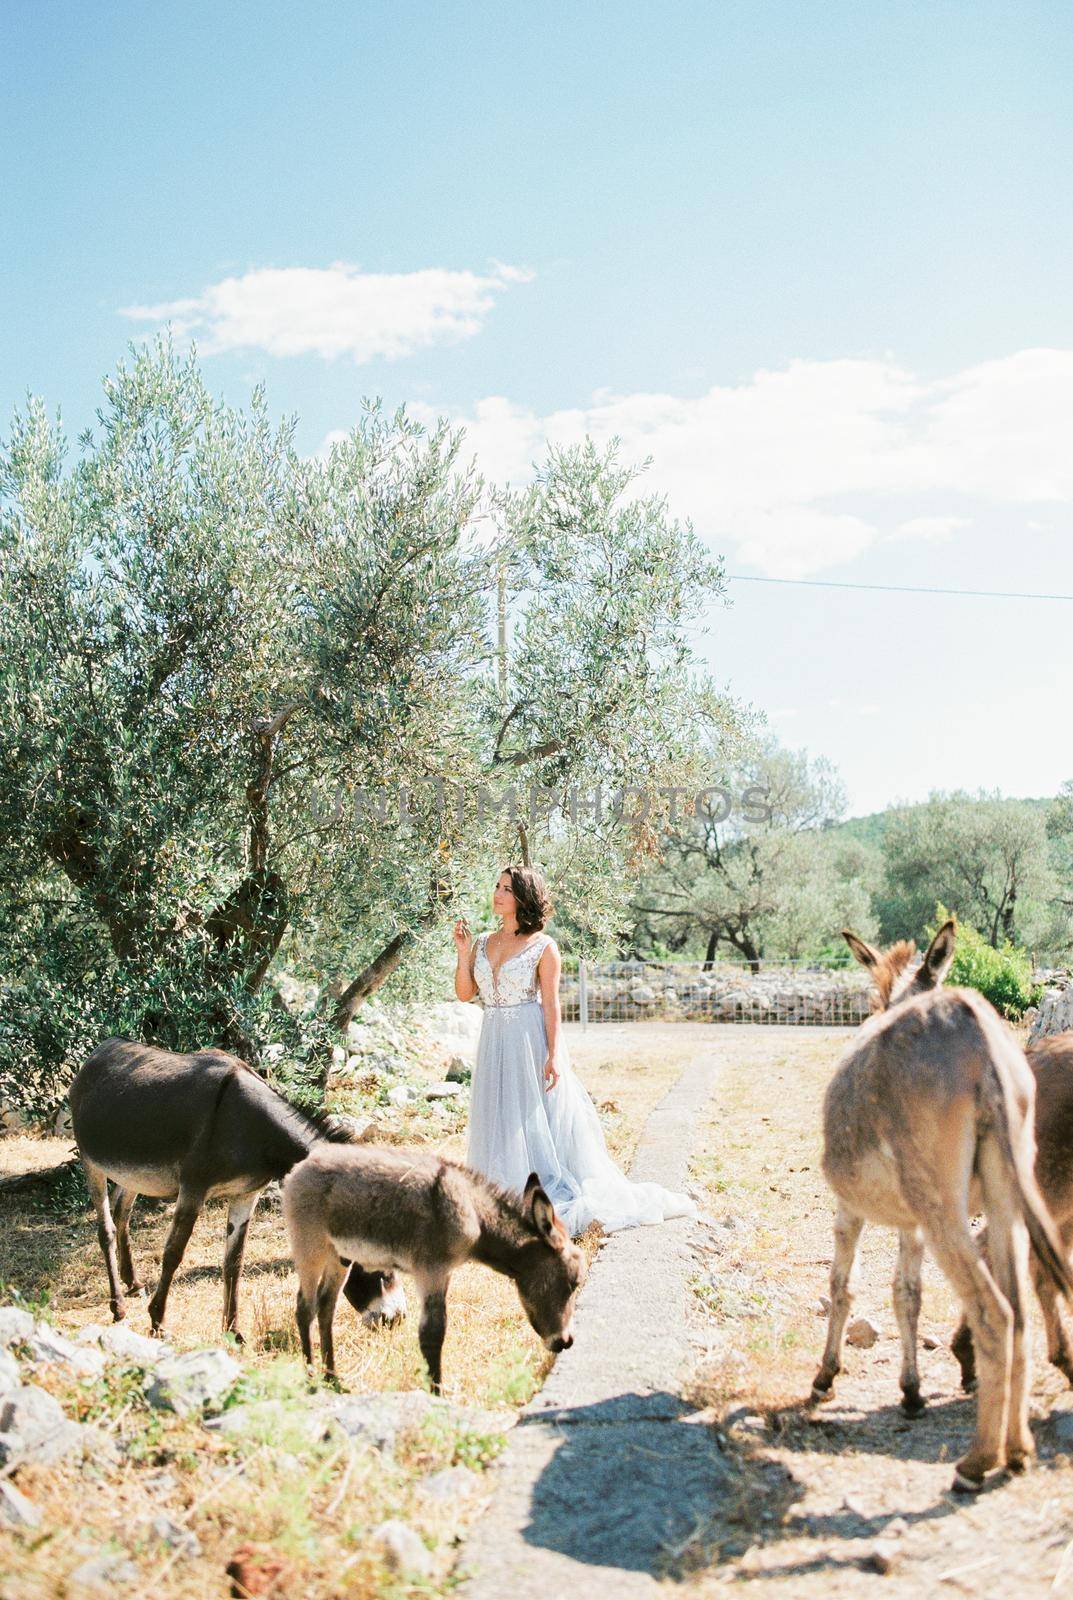 Bride stand under an olive tree near grazing donkeys. High quality photo